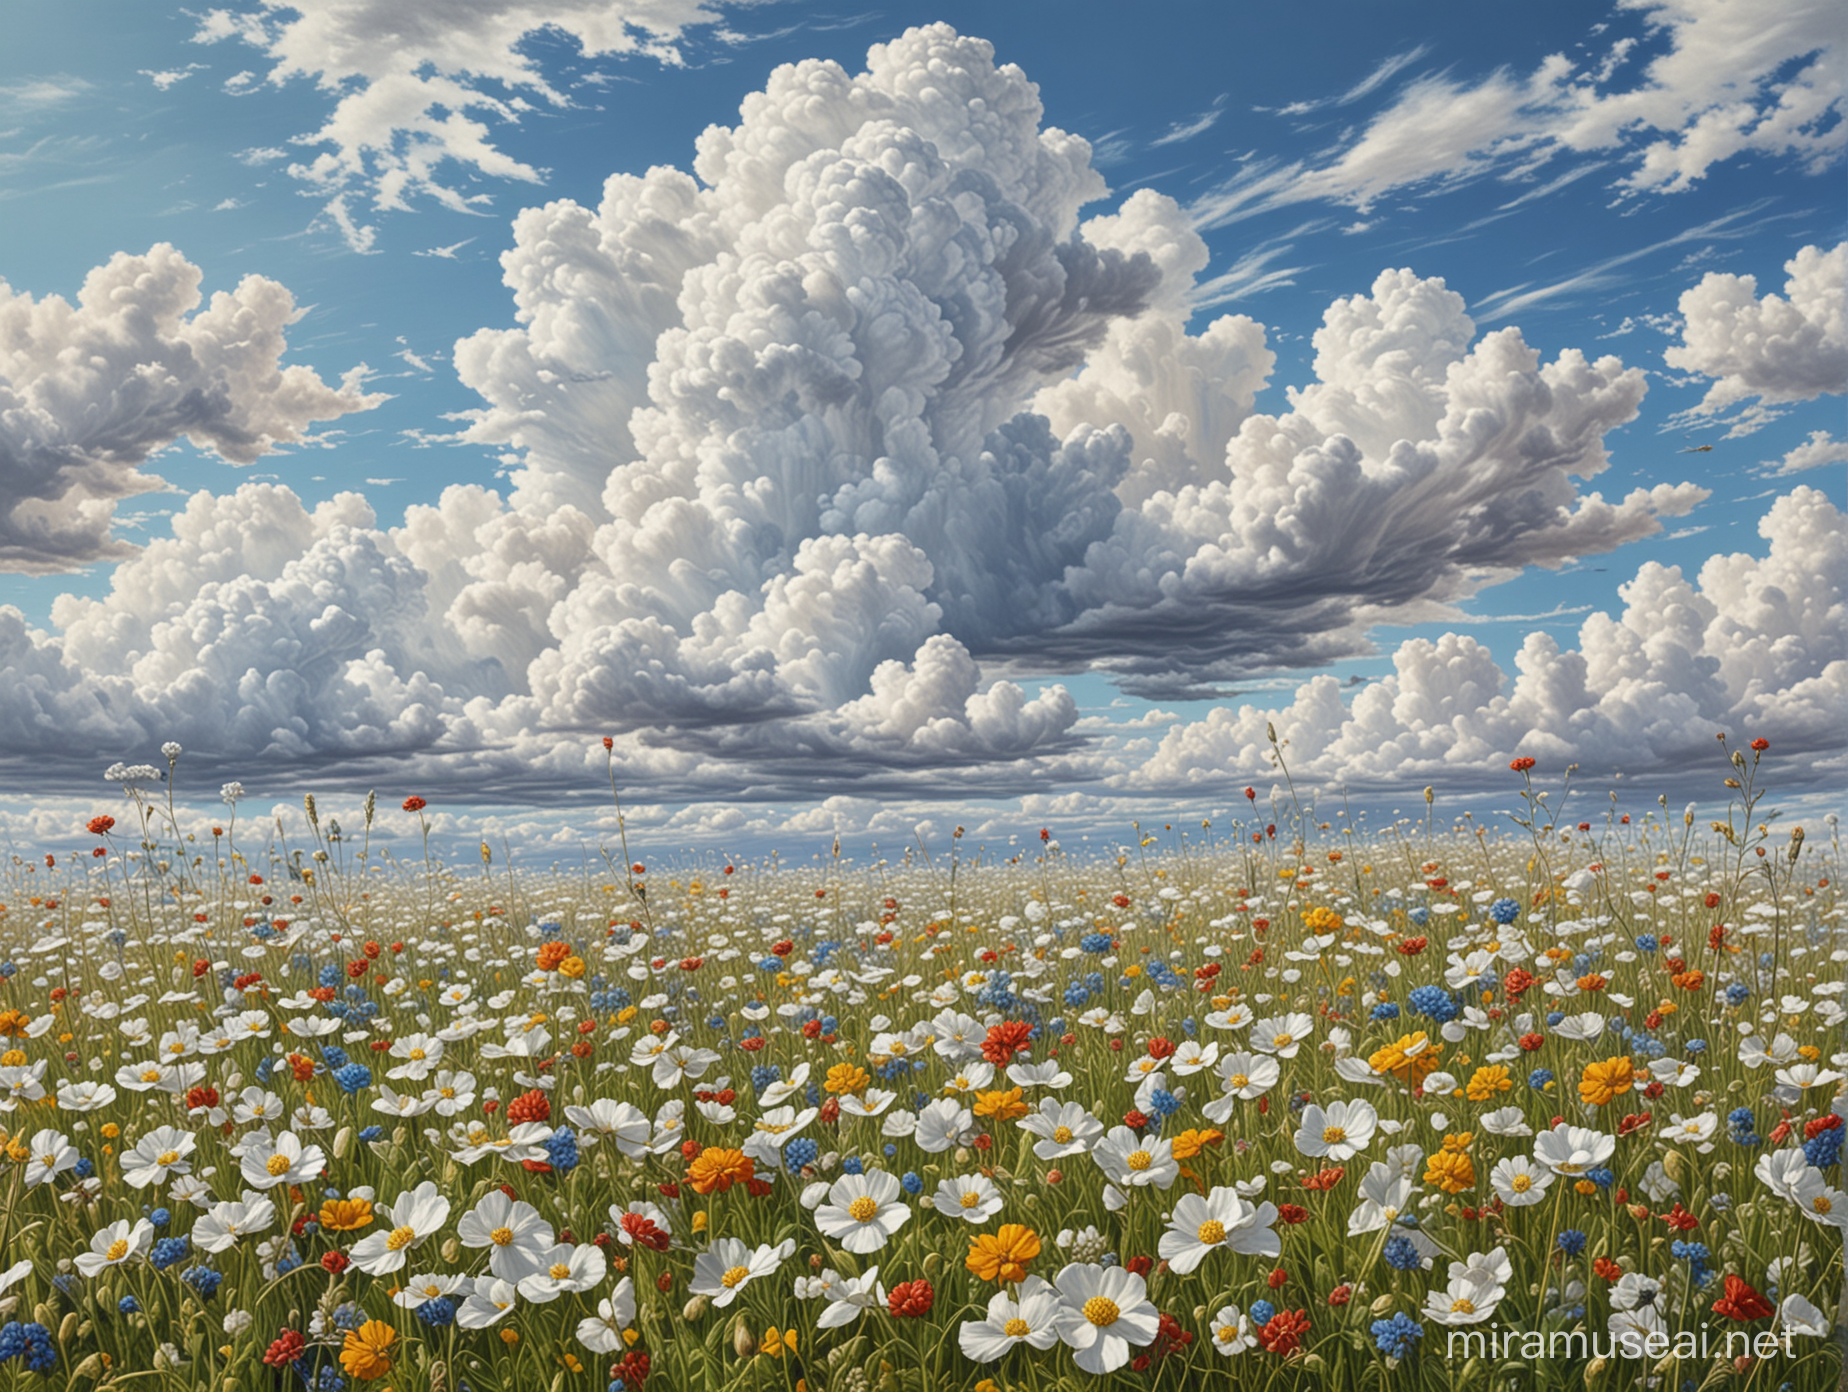 Vibrant Wild Flowers Field Painting with Realistic Cloudscape